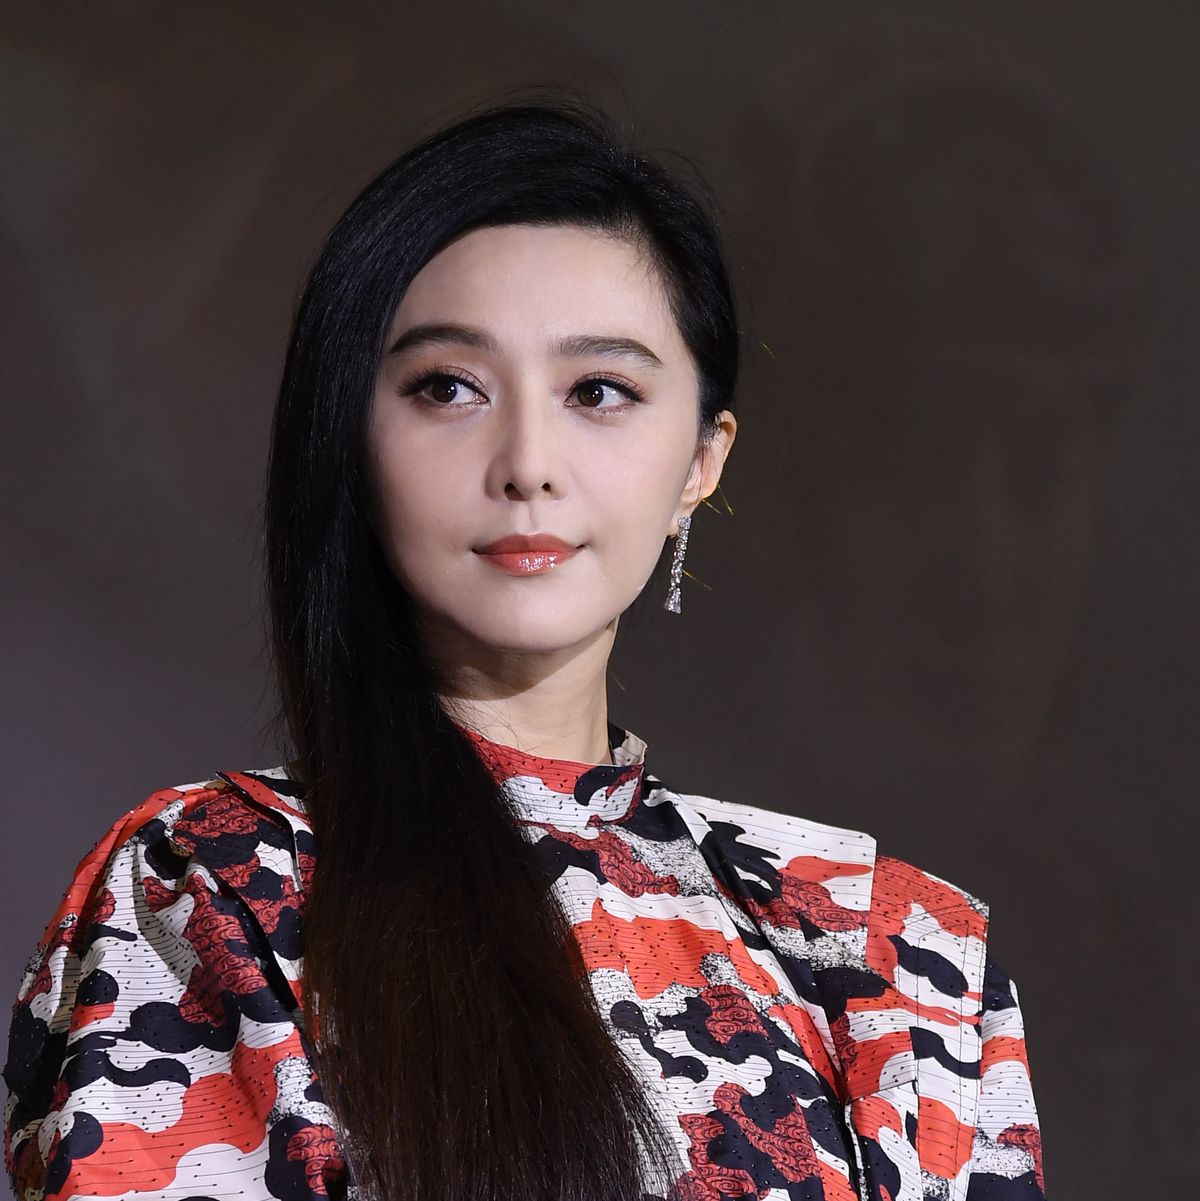 Fan Bingbing Reportedly Released from a Detention Location in China